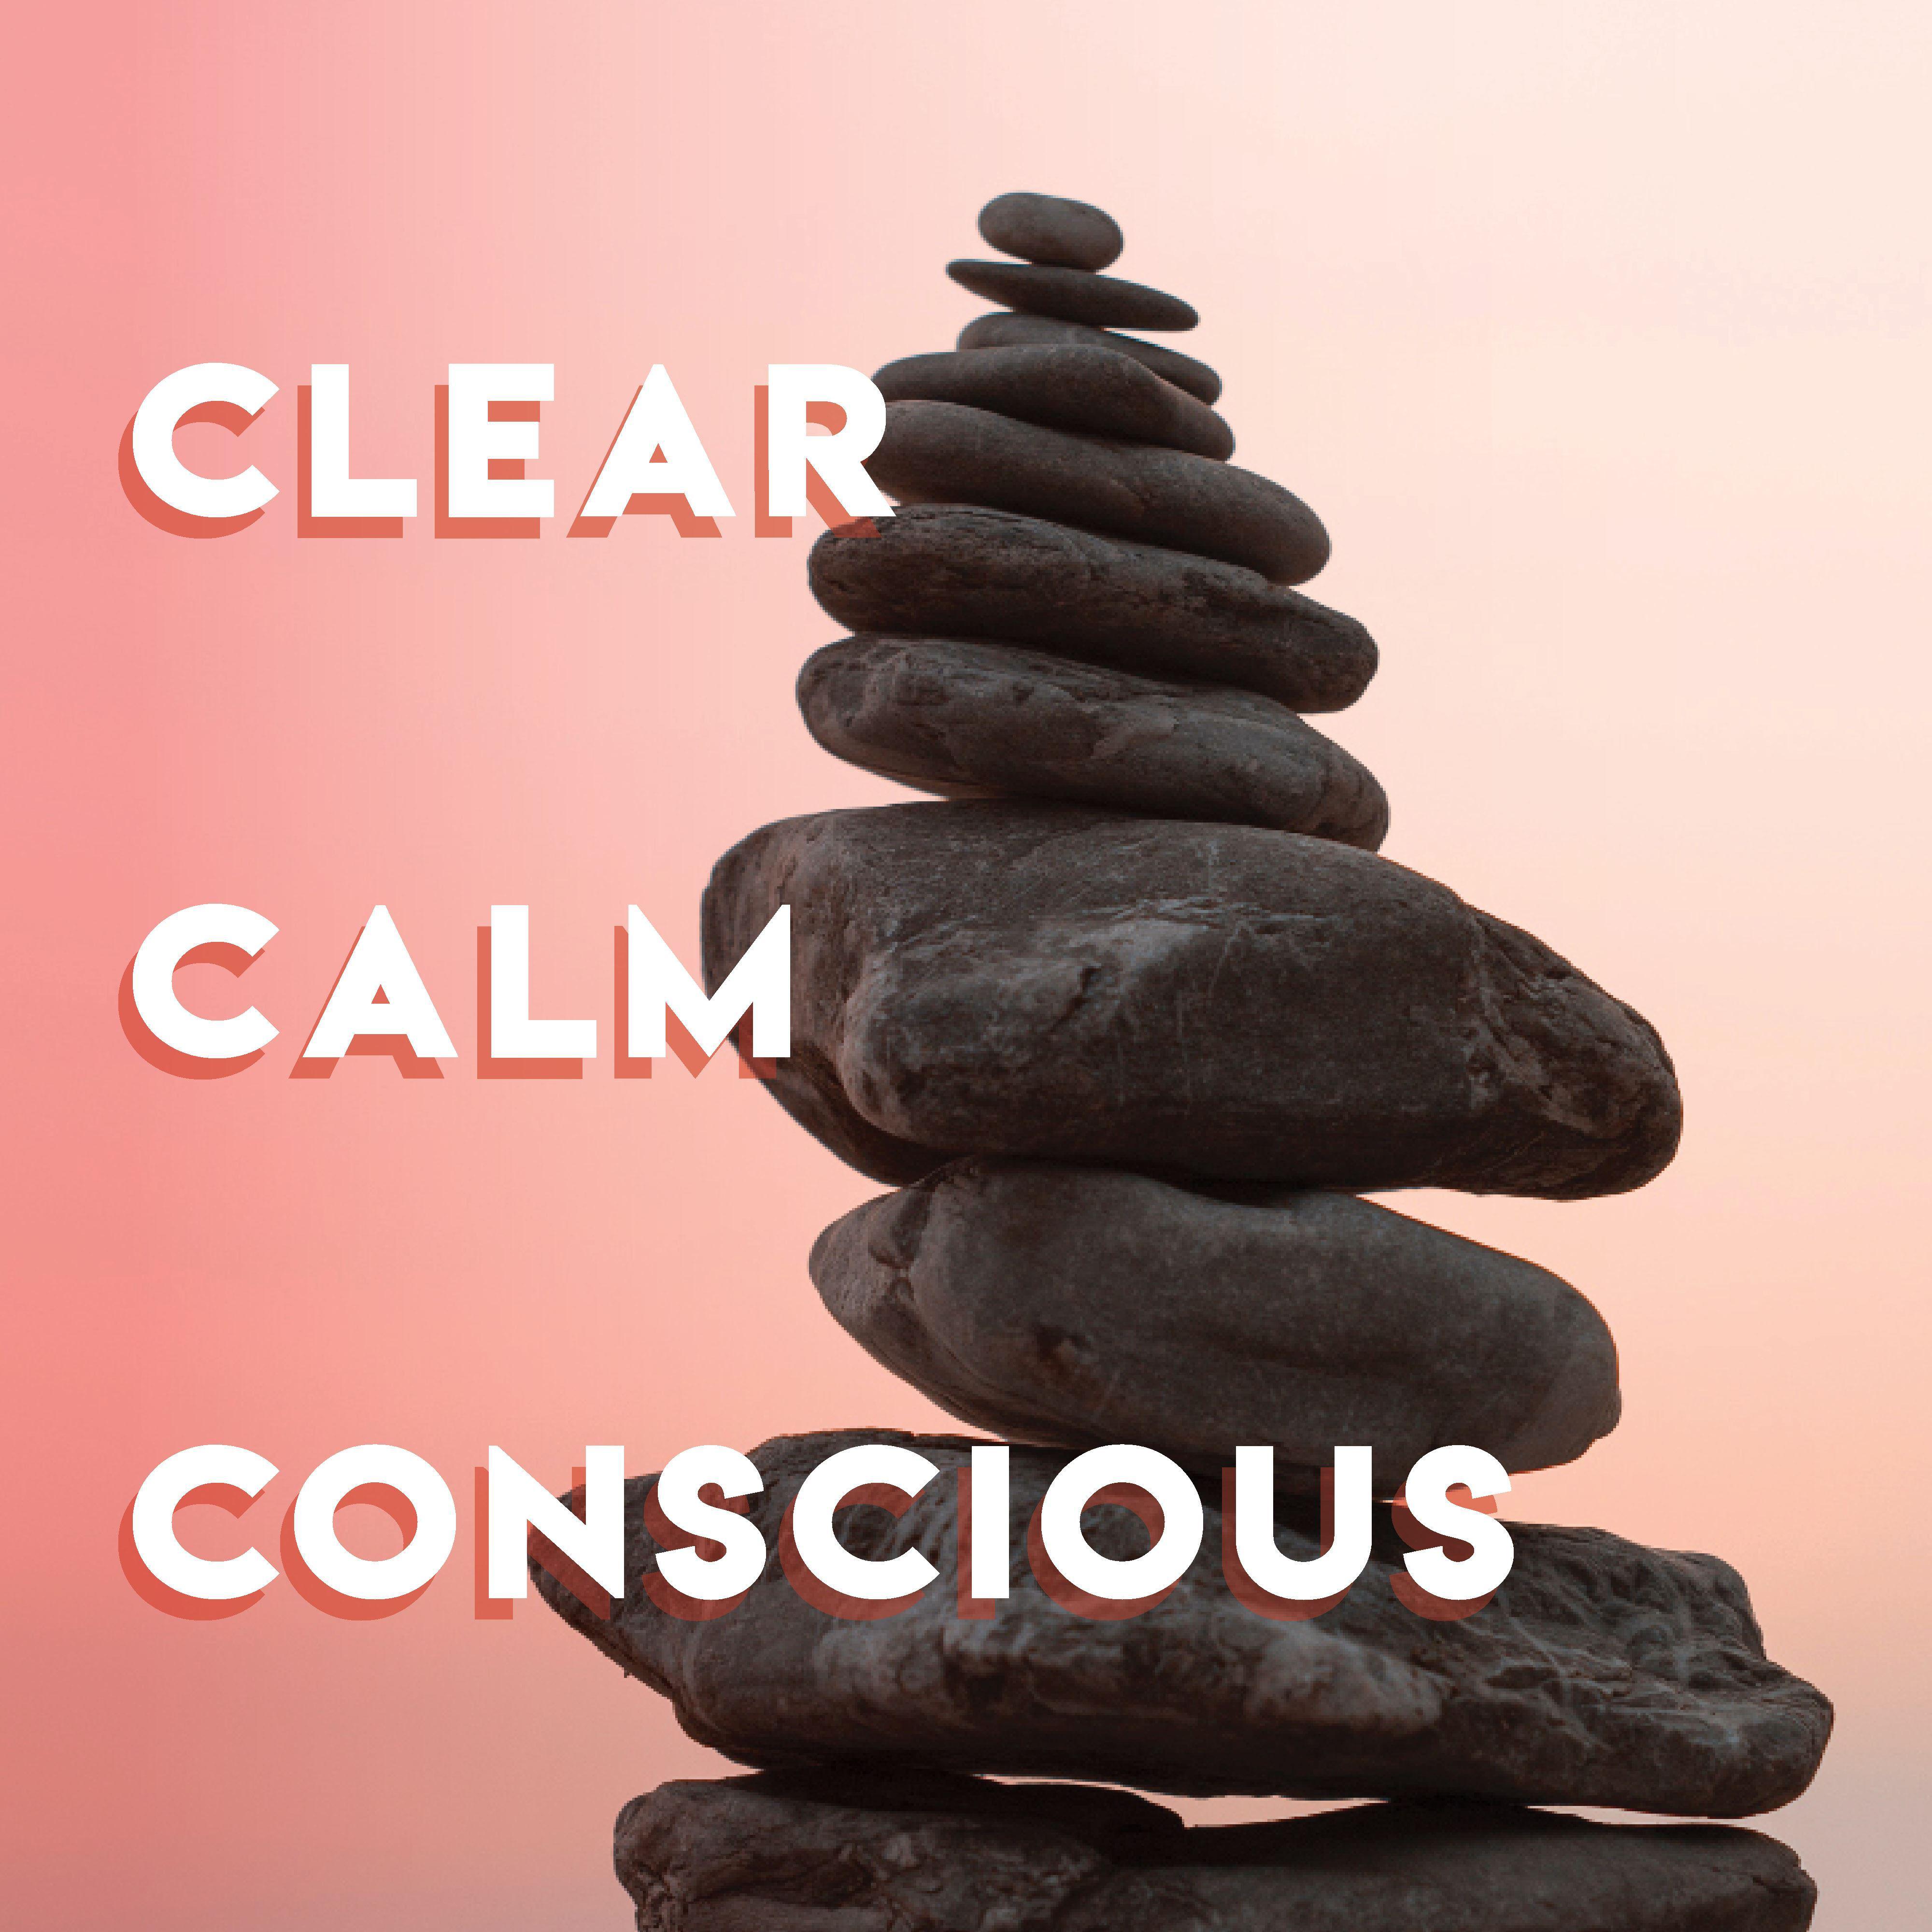 Clear, calm and conscious